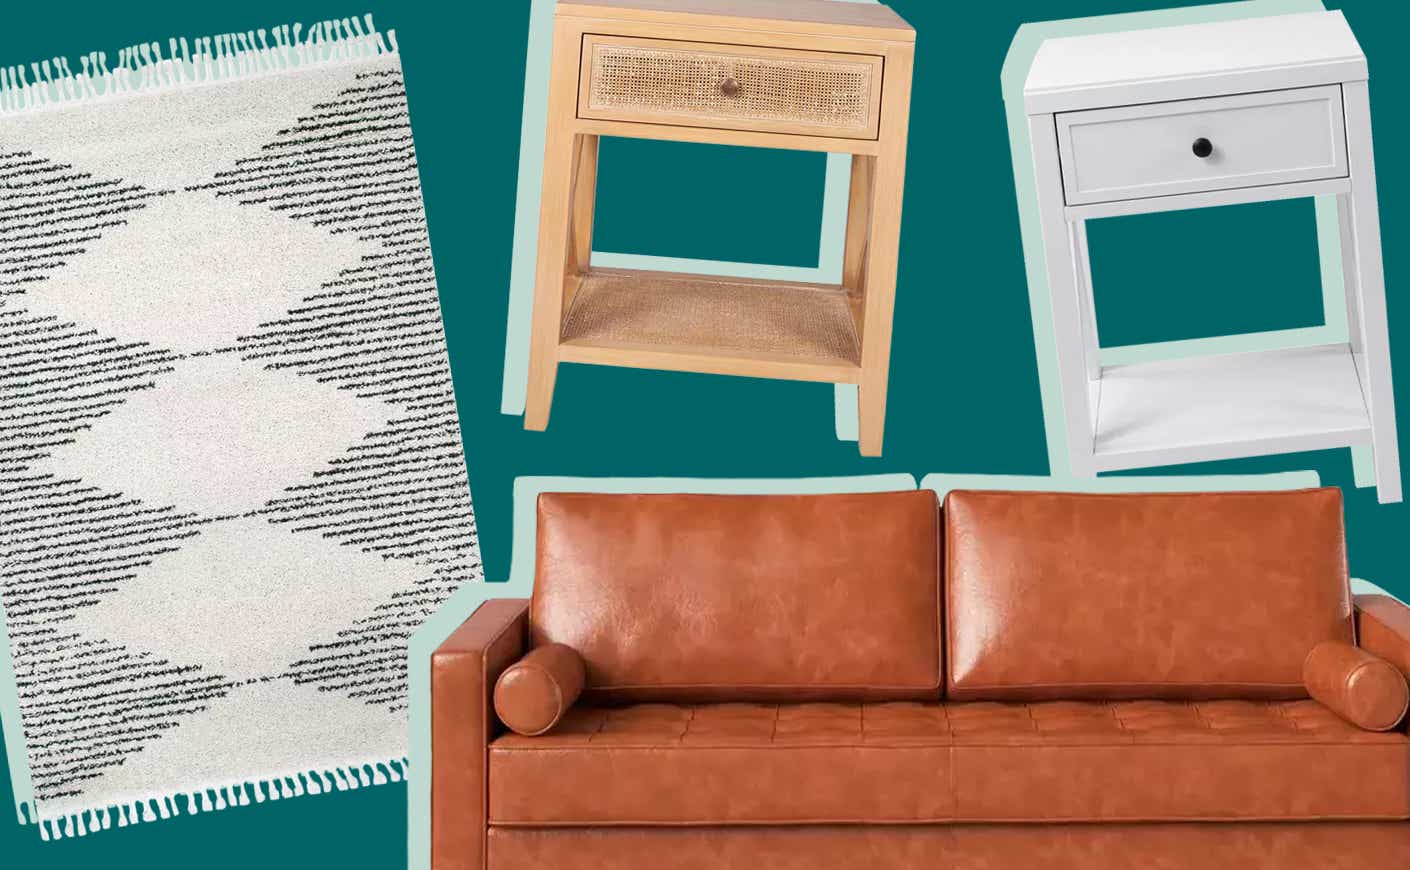 50  Prime Day alternative sales you don't want to miss: Walmart,  Wayfair, Kohl's 